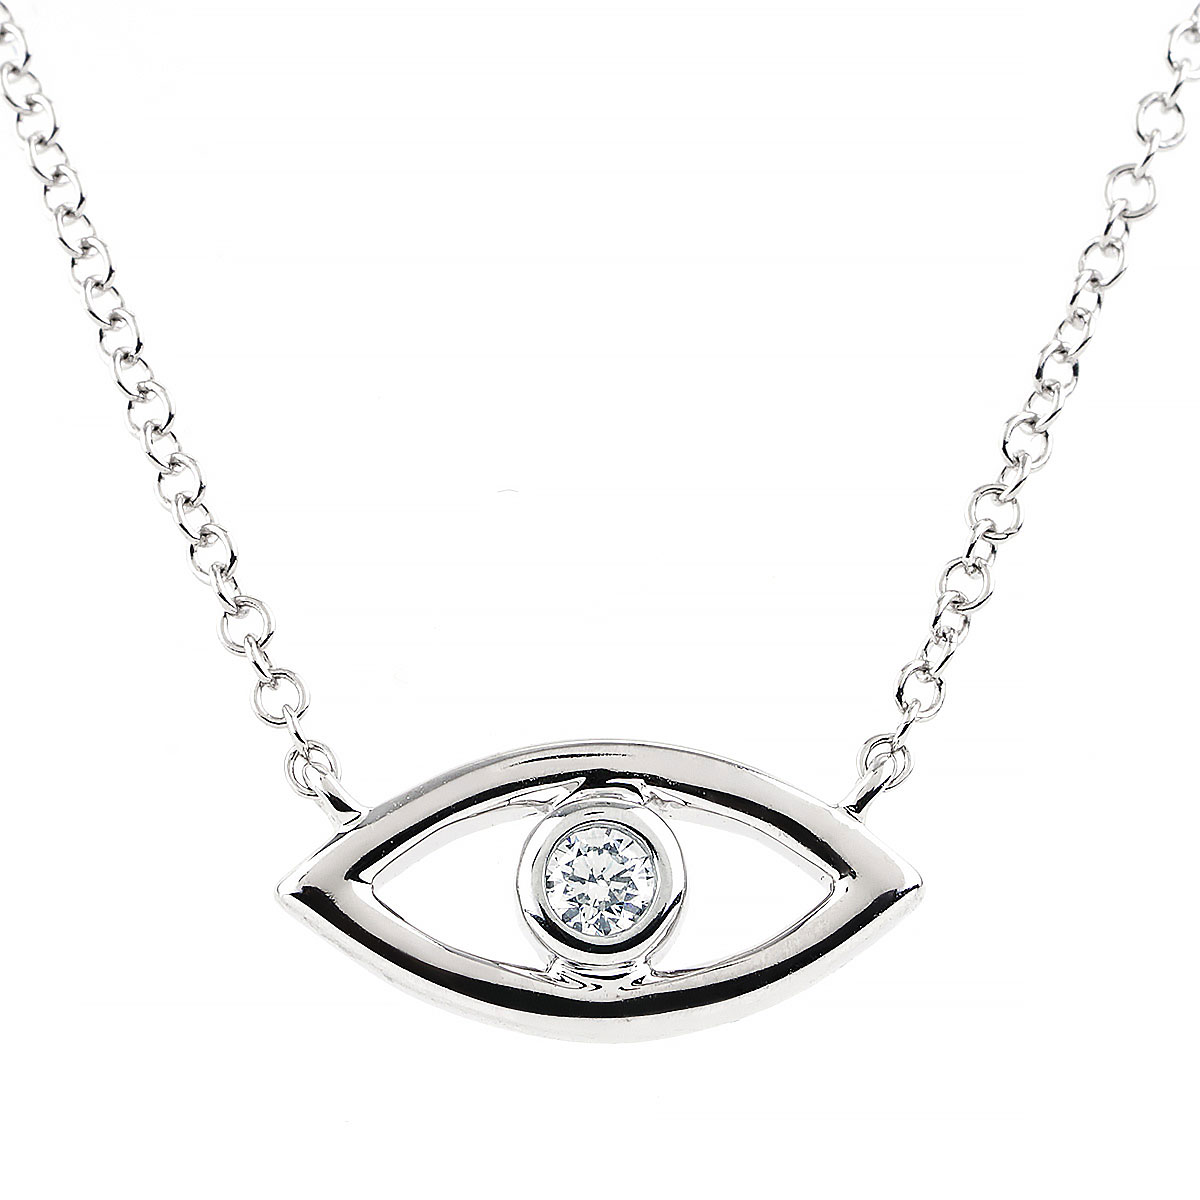 Turkish Evil Eye Necklace | Fab Couture